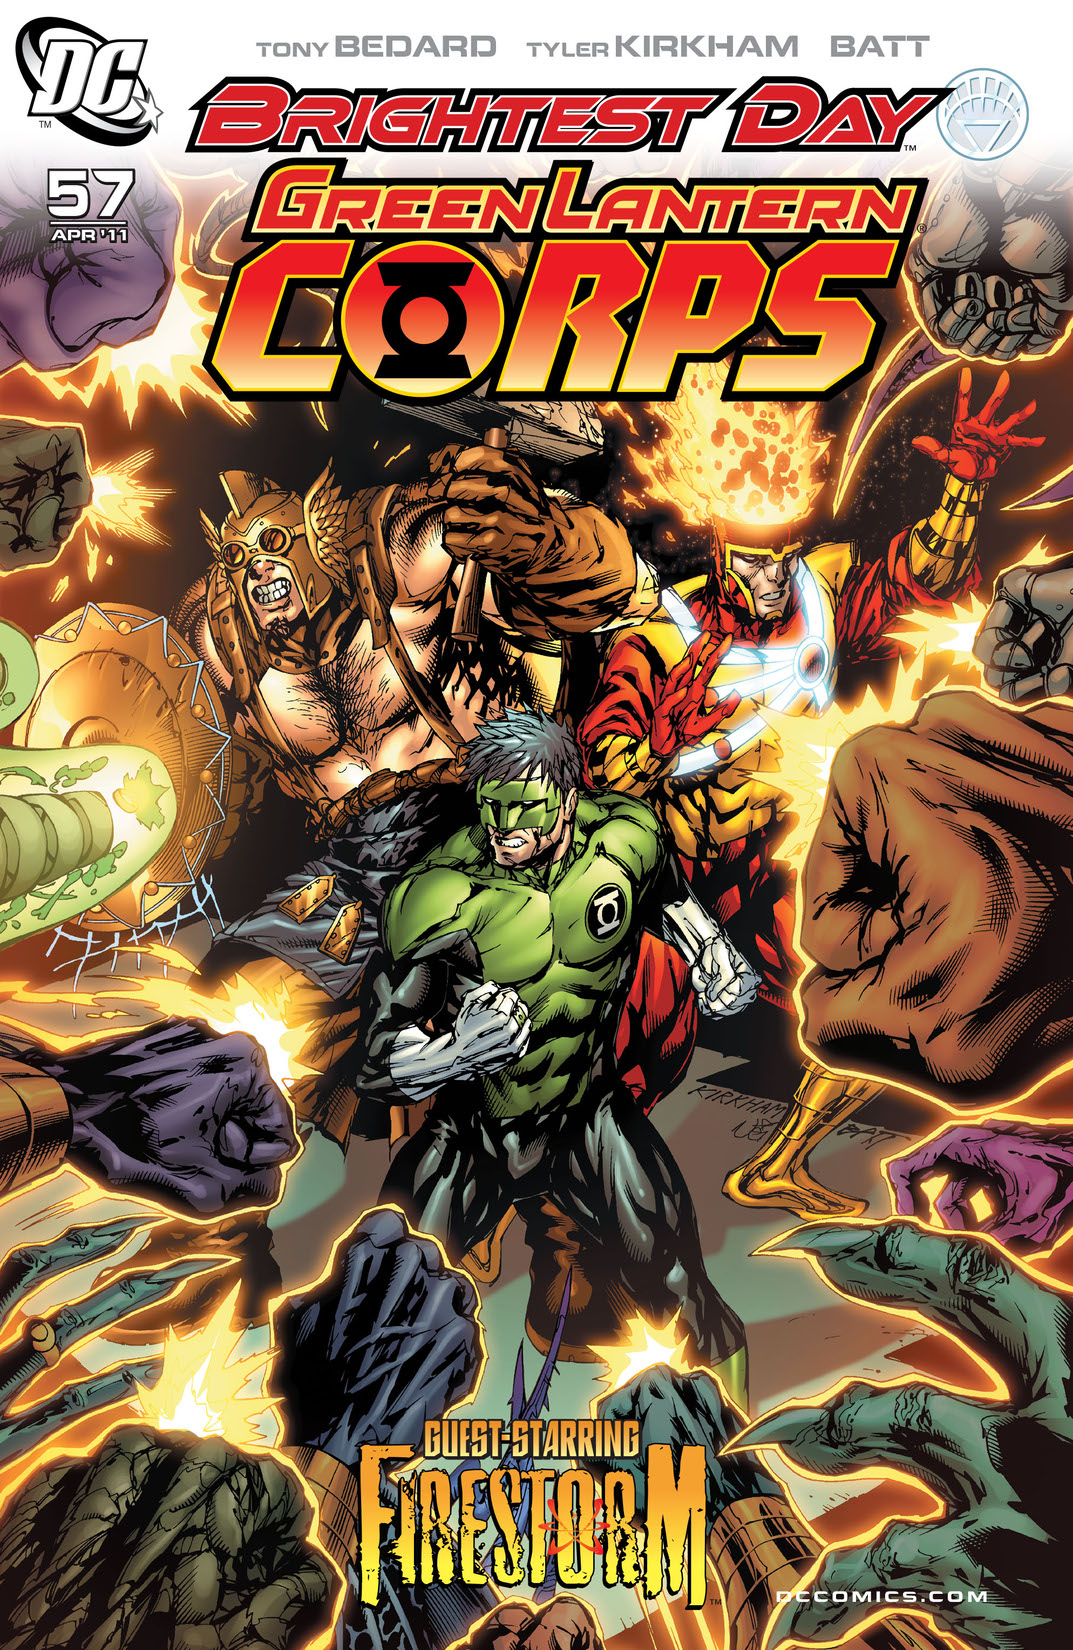 Green Lantern Corps (2006-) #57 preview images